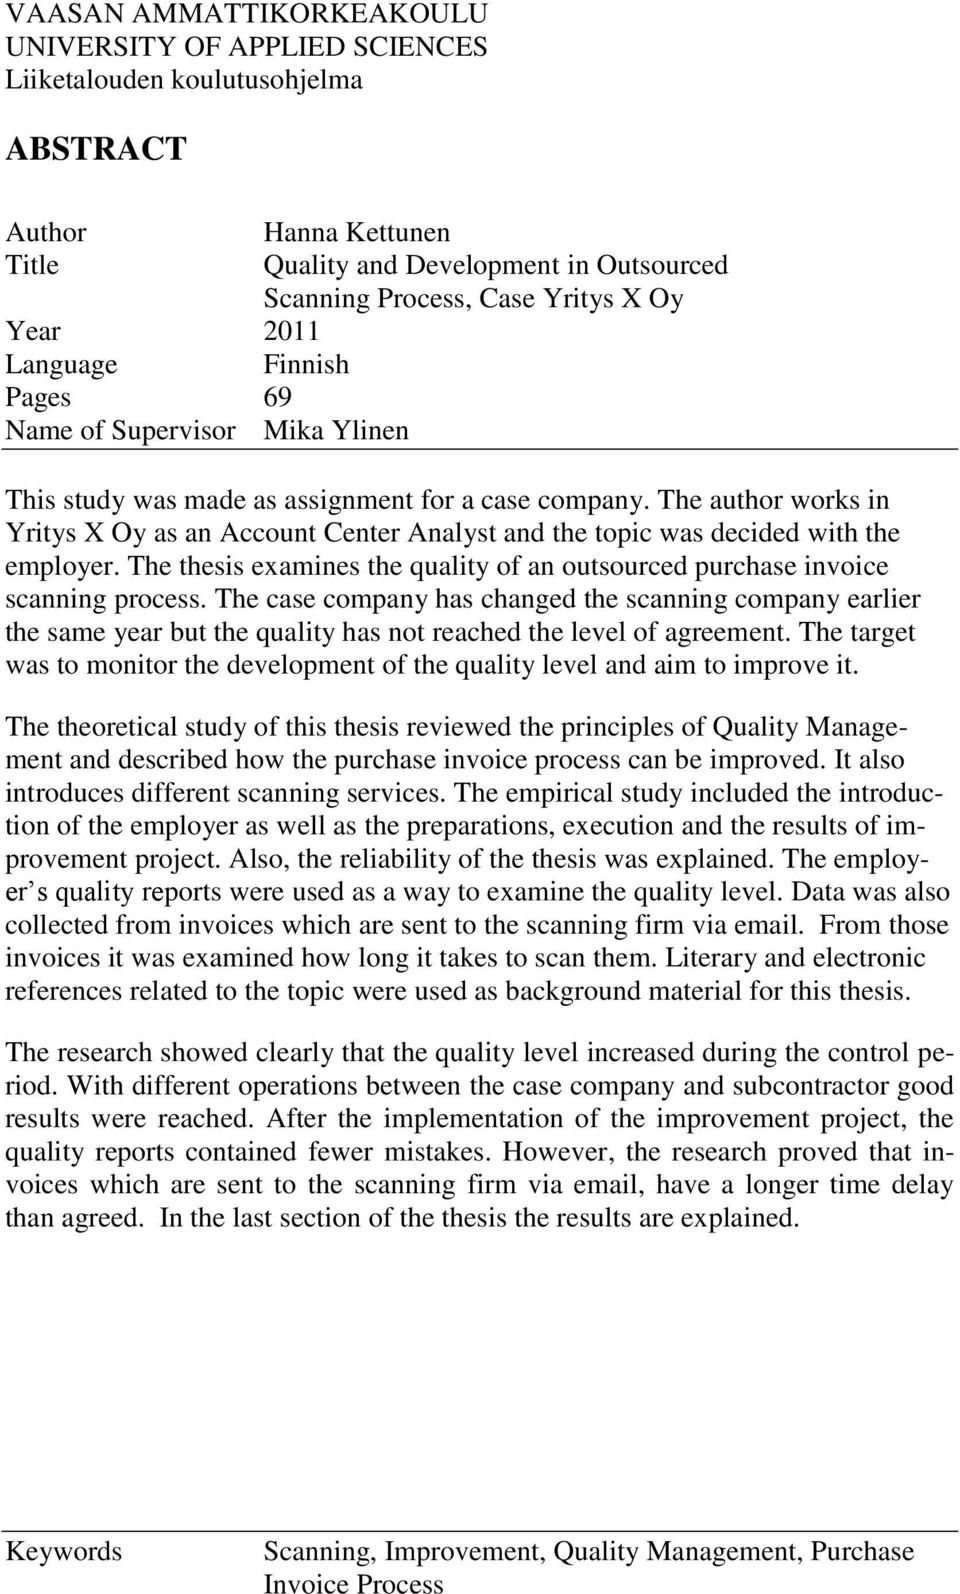 The author works in Yritys X Oy as an Account Center Analyst and the topic was decided with the employer. The thesis examines the quality of an outsourced purchase invoice scanning process.